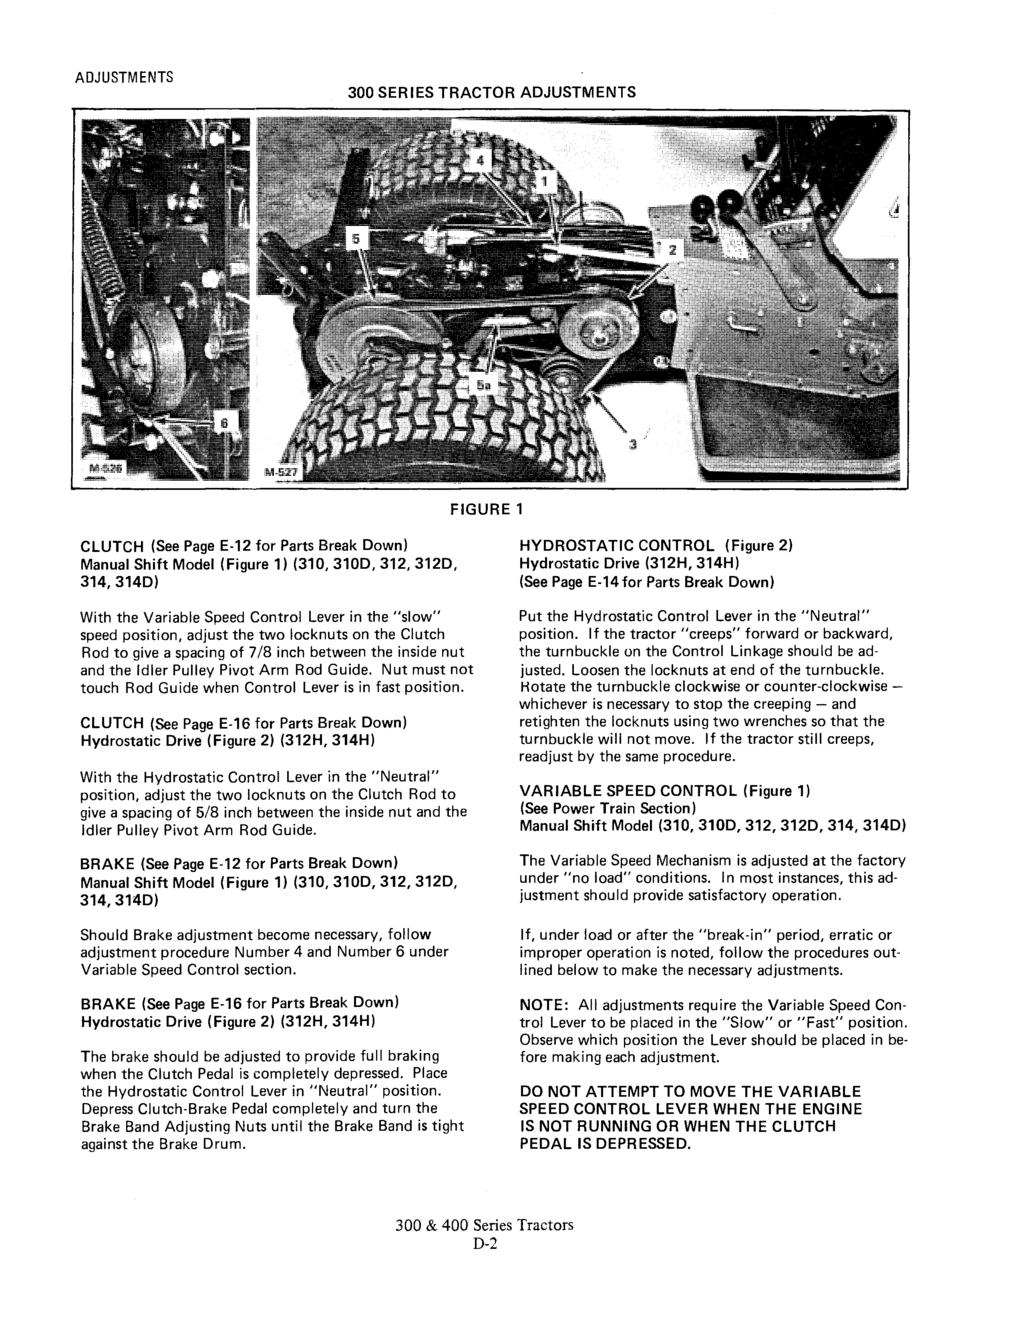 ADJUSTM ENTS 300 SERIES TRACTOR ADJUSTMENTS FIGURE 1 CLUTCH (See Page E-1 for Parts Break Down) Manual Shift Model (Figure 1) (310, 310D, 31, 31D, 314,314D) With the Variable Speed Control Lever in